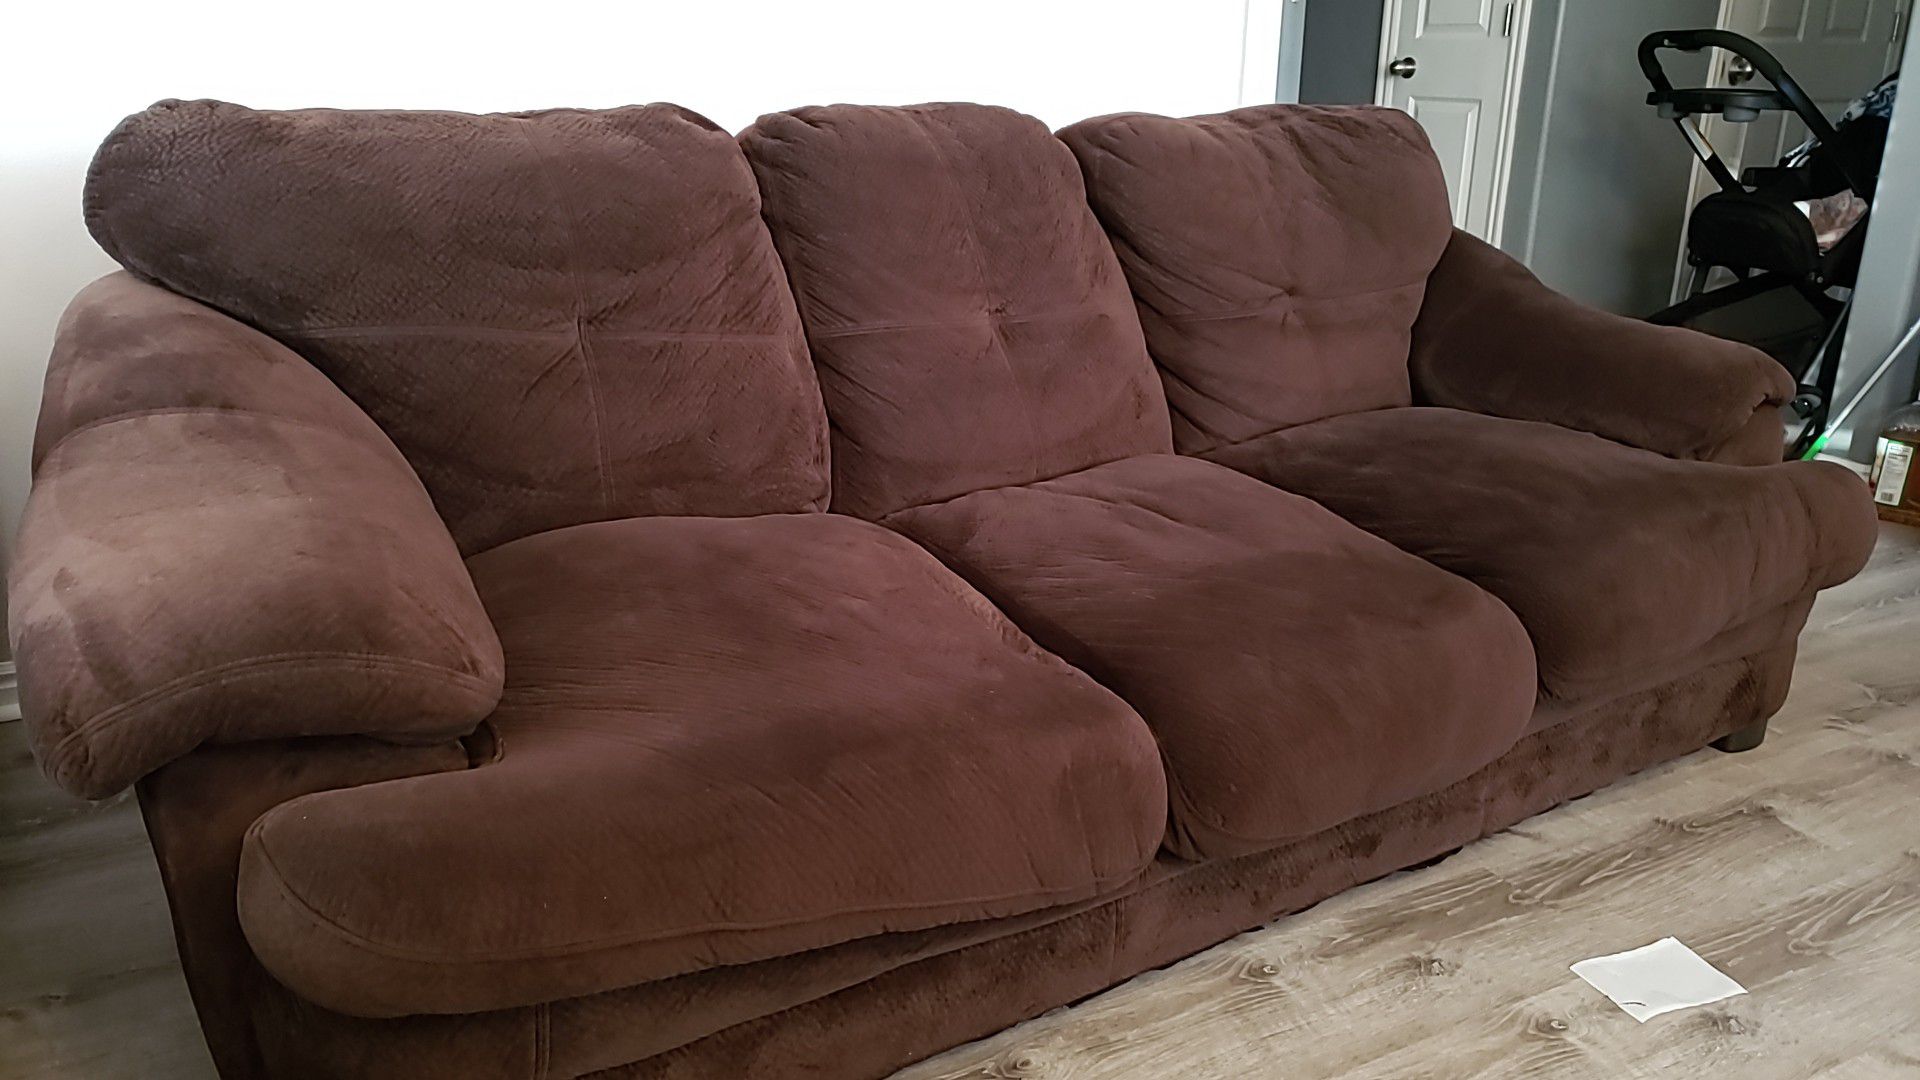 RcWilley couch